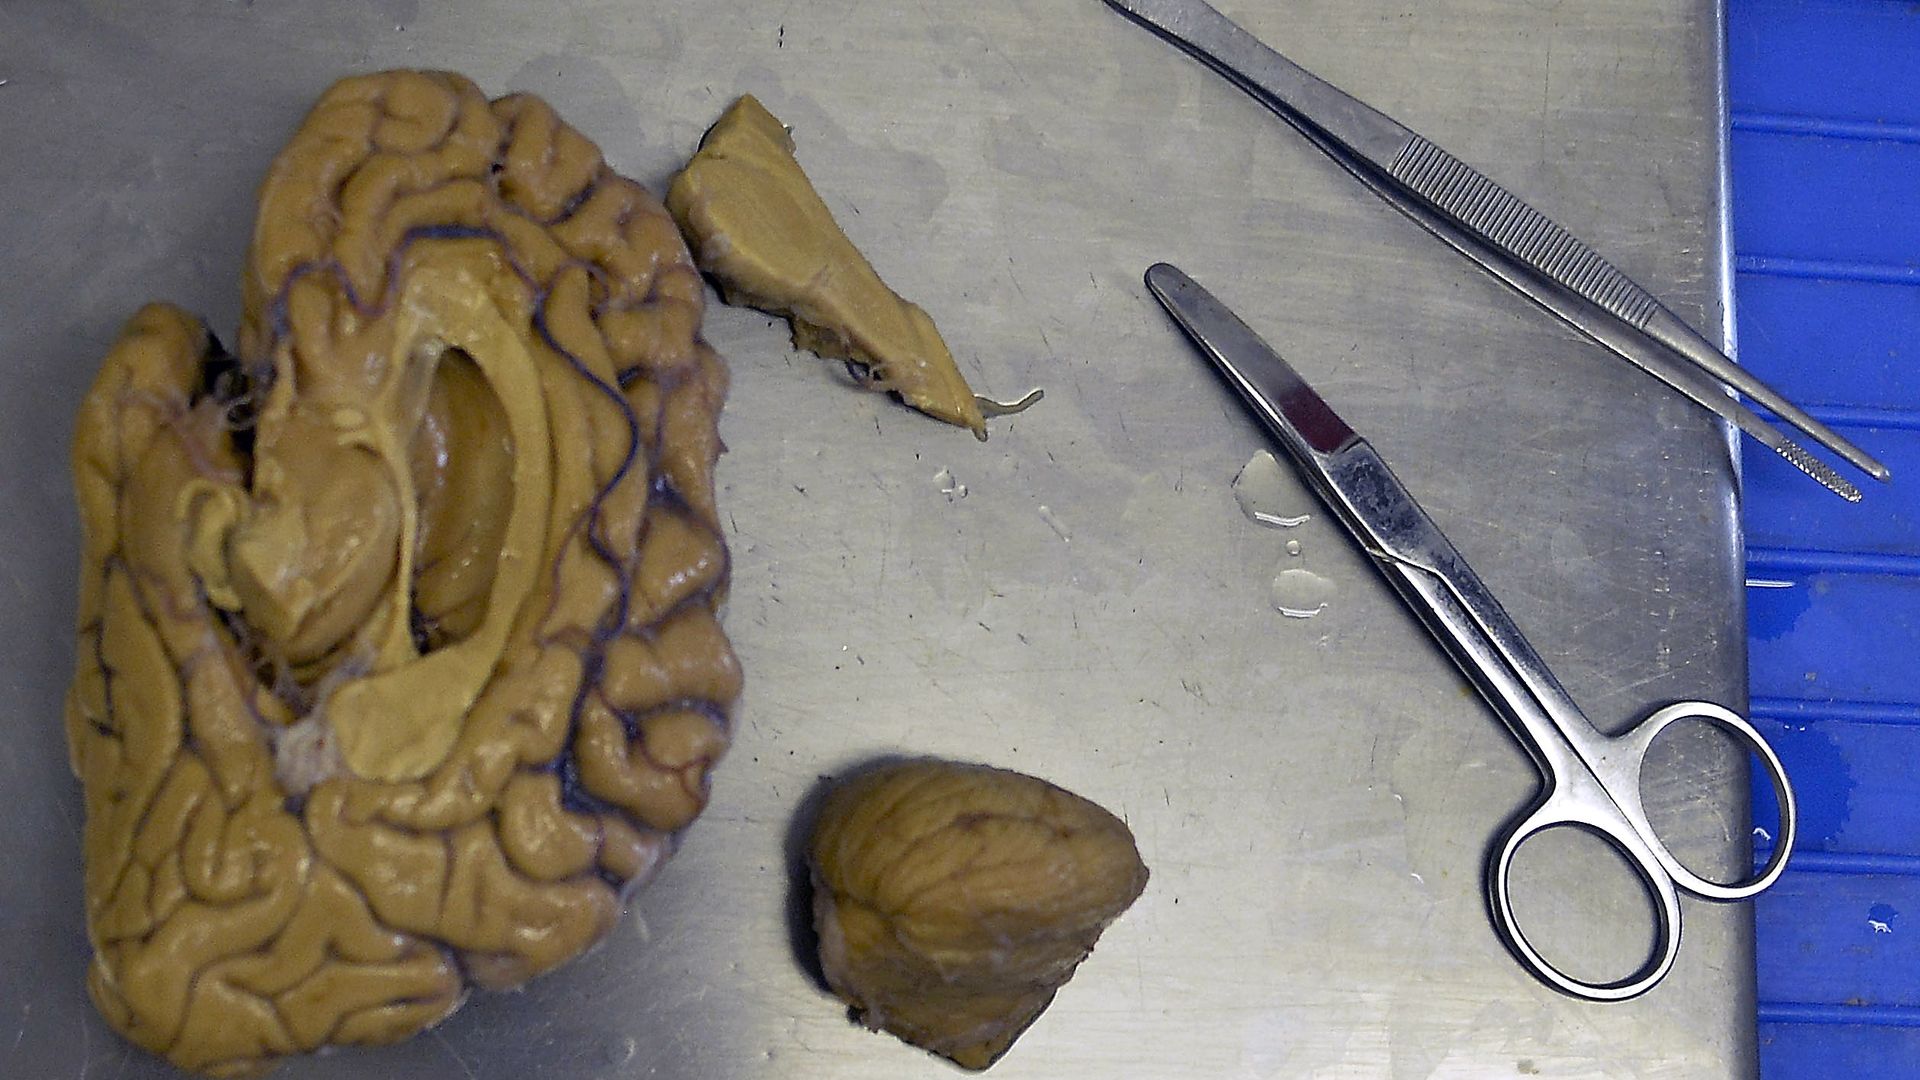 View of a brain section at the laboratory in Medellin, Antioquia department, Colombia.